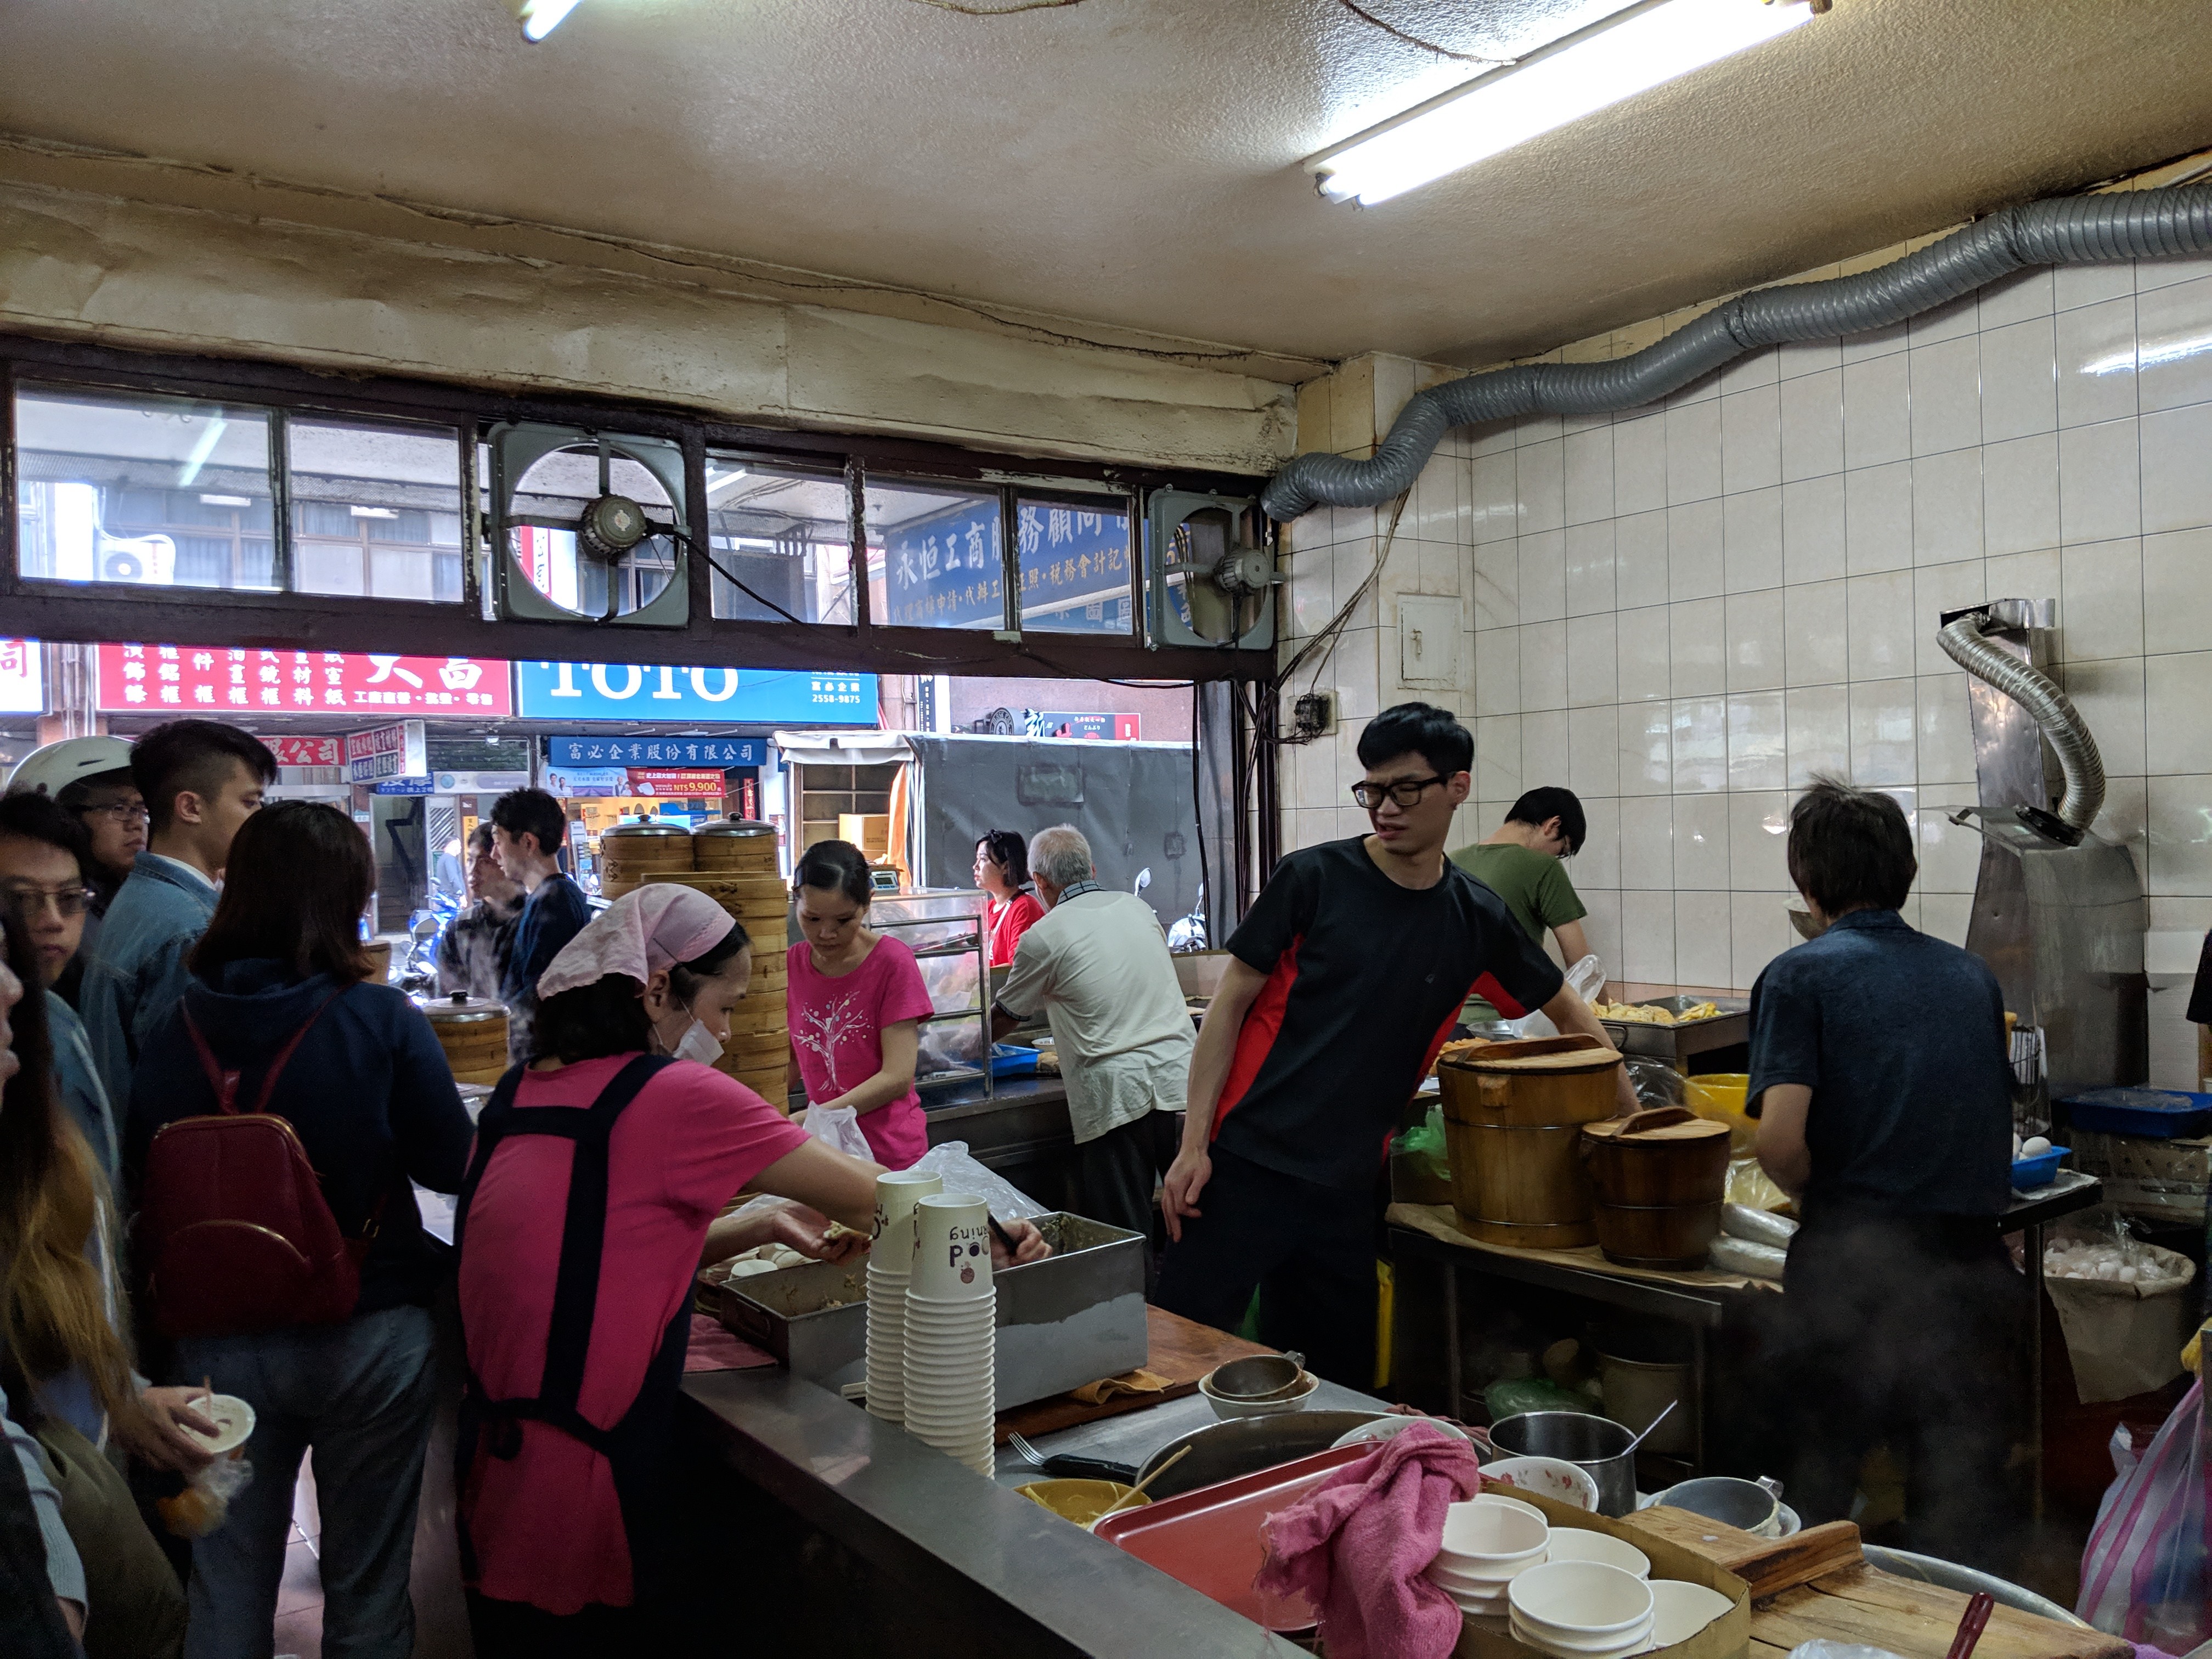 Our view from the line at the youtiao shop, with the cooks hard at work